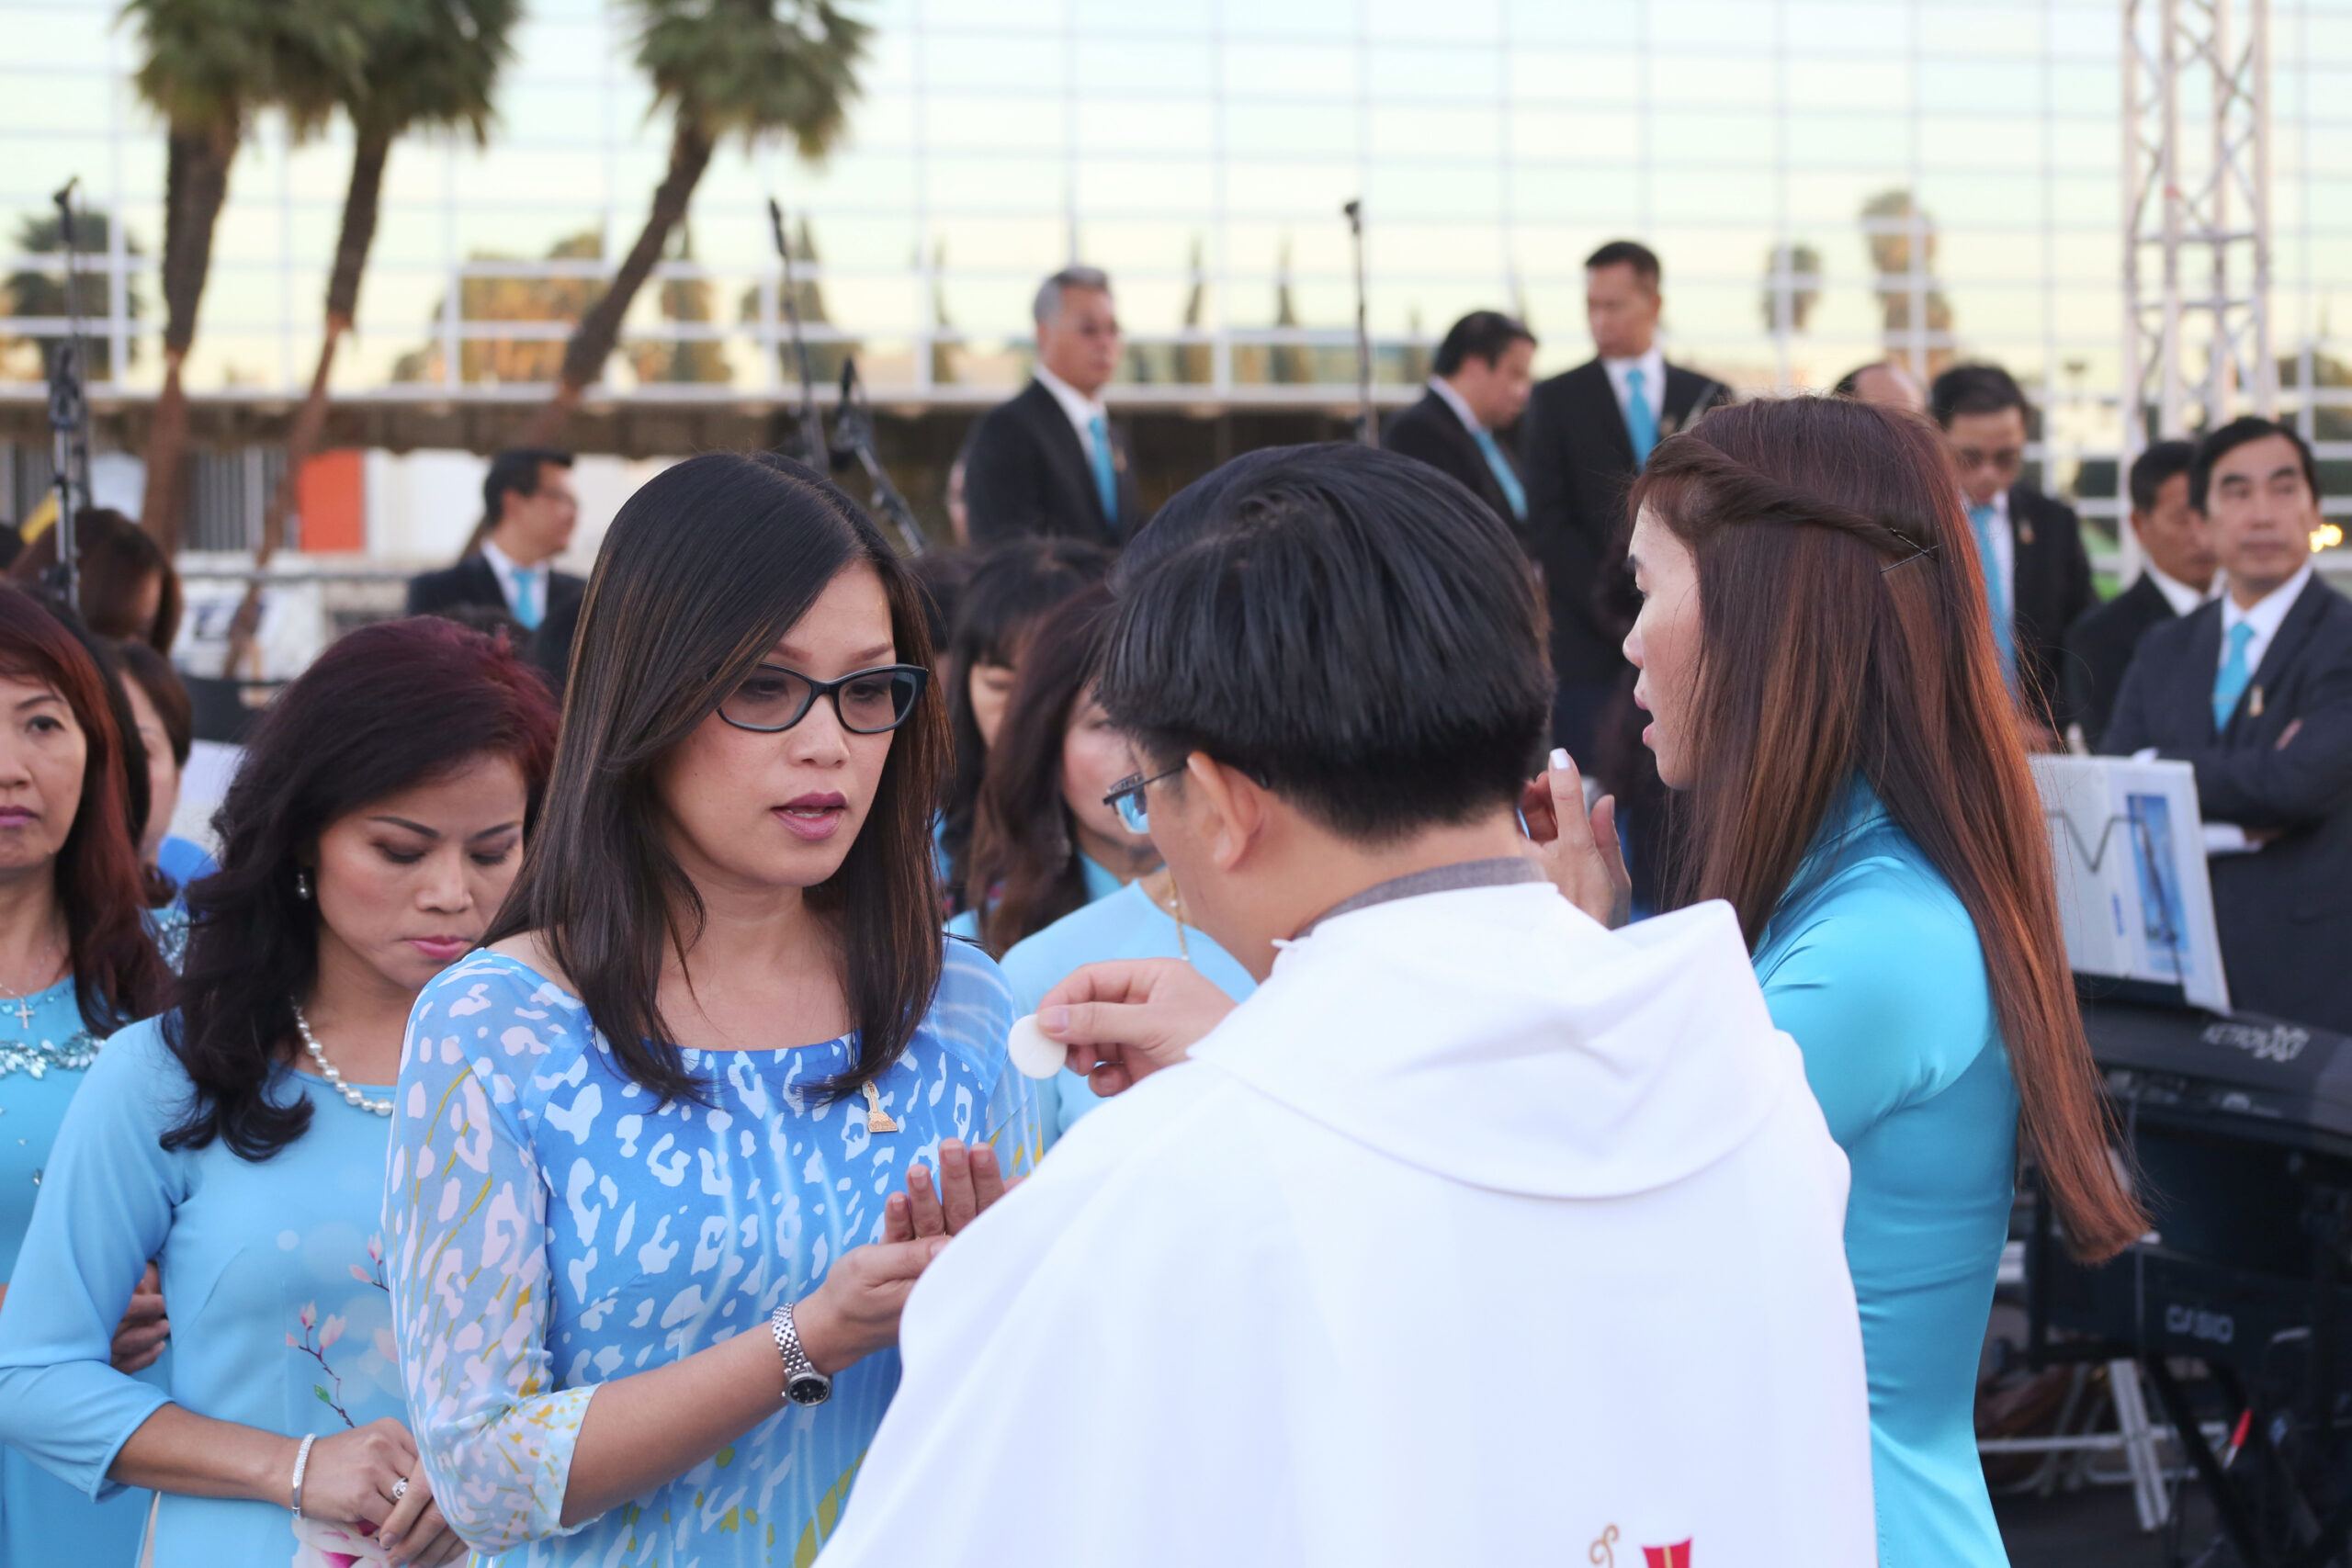 The outdoor Mass on Saturday, Oct. 21, 2017 was attended by many Vietnamese Catholics who were looking forward to the construction of the shrine that honors the Blessed Mother. Photo courtesy Diocese of Orange.